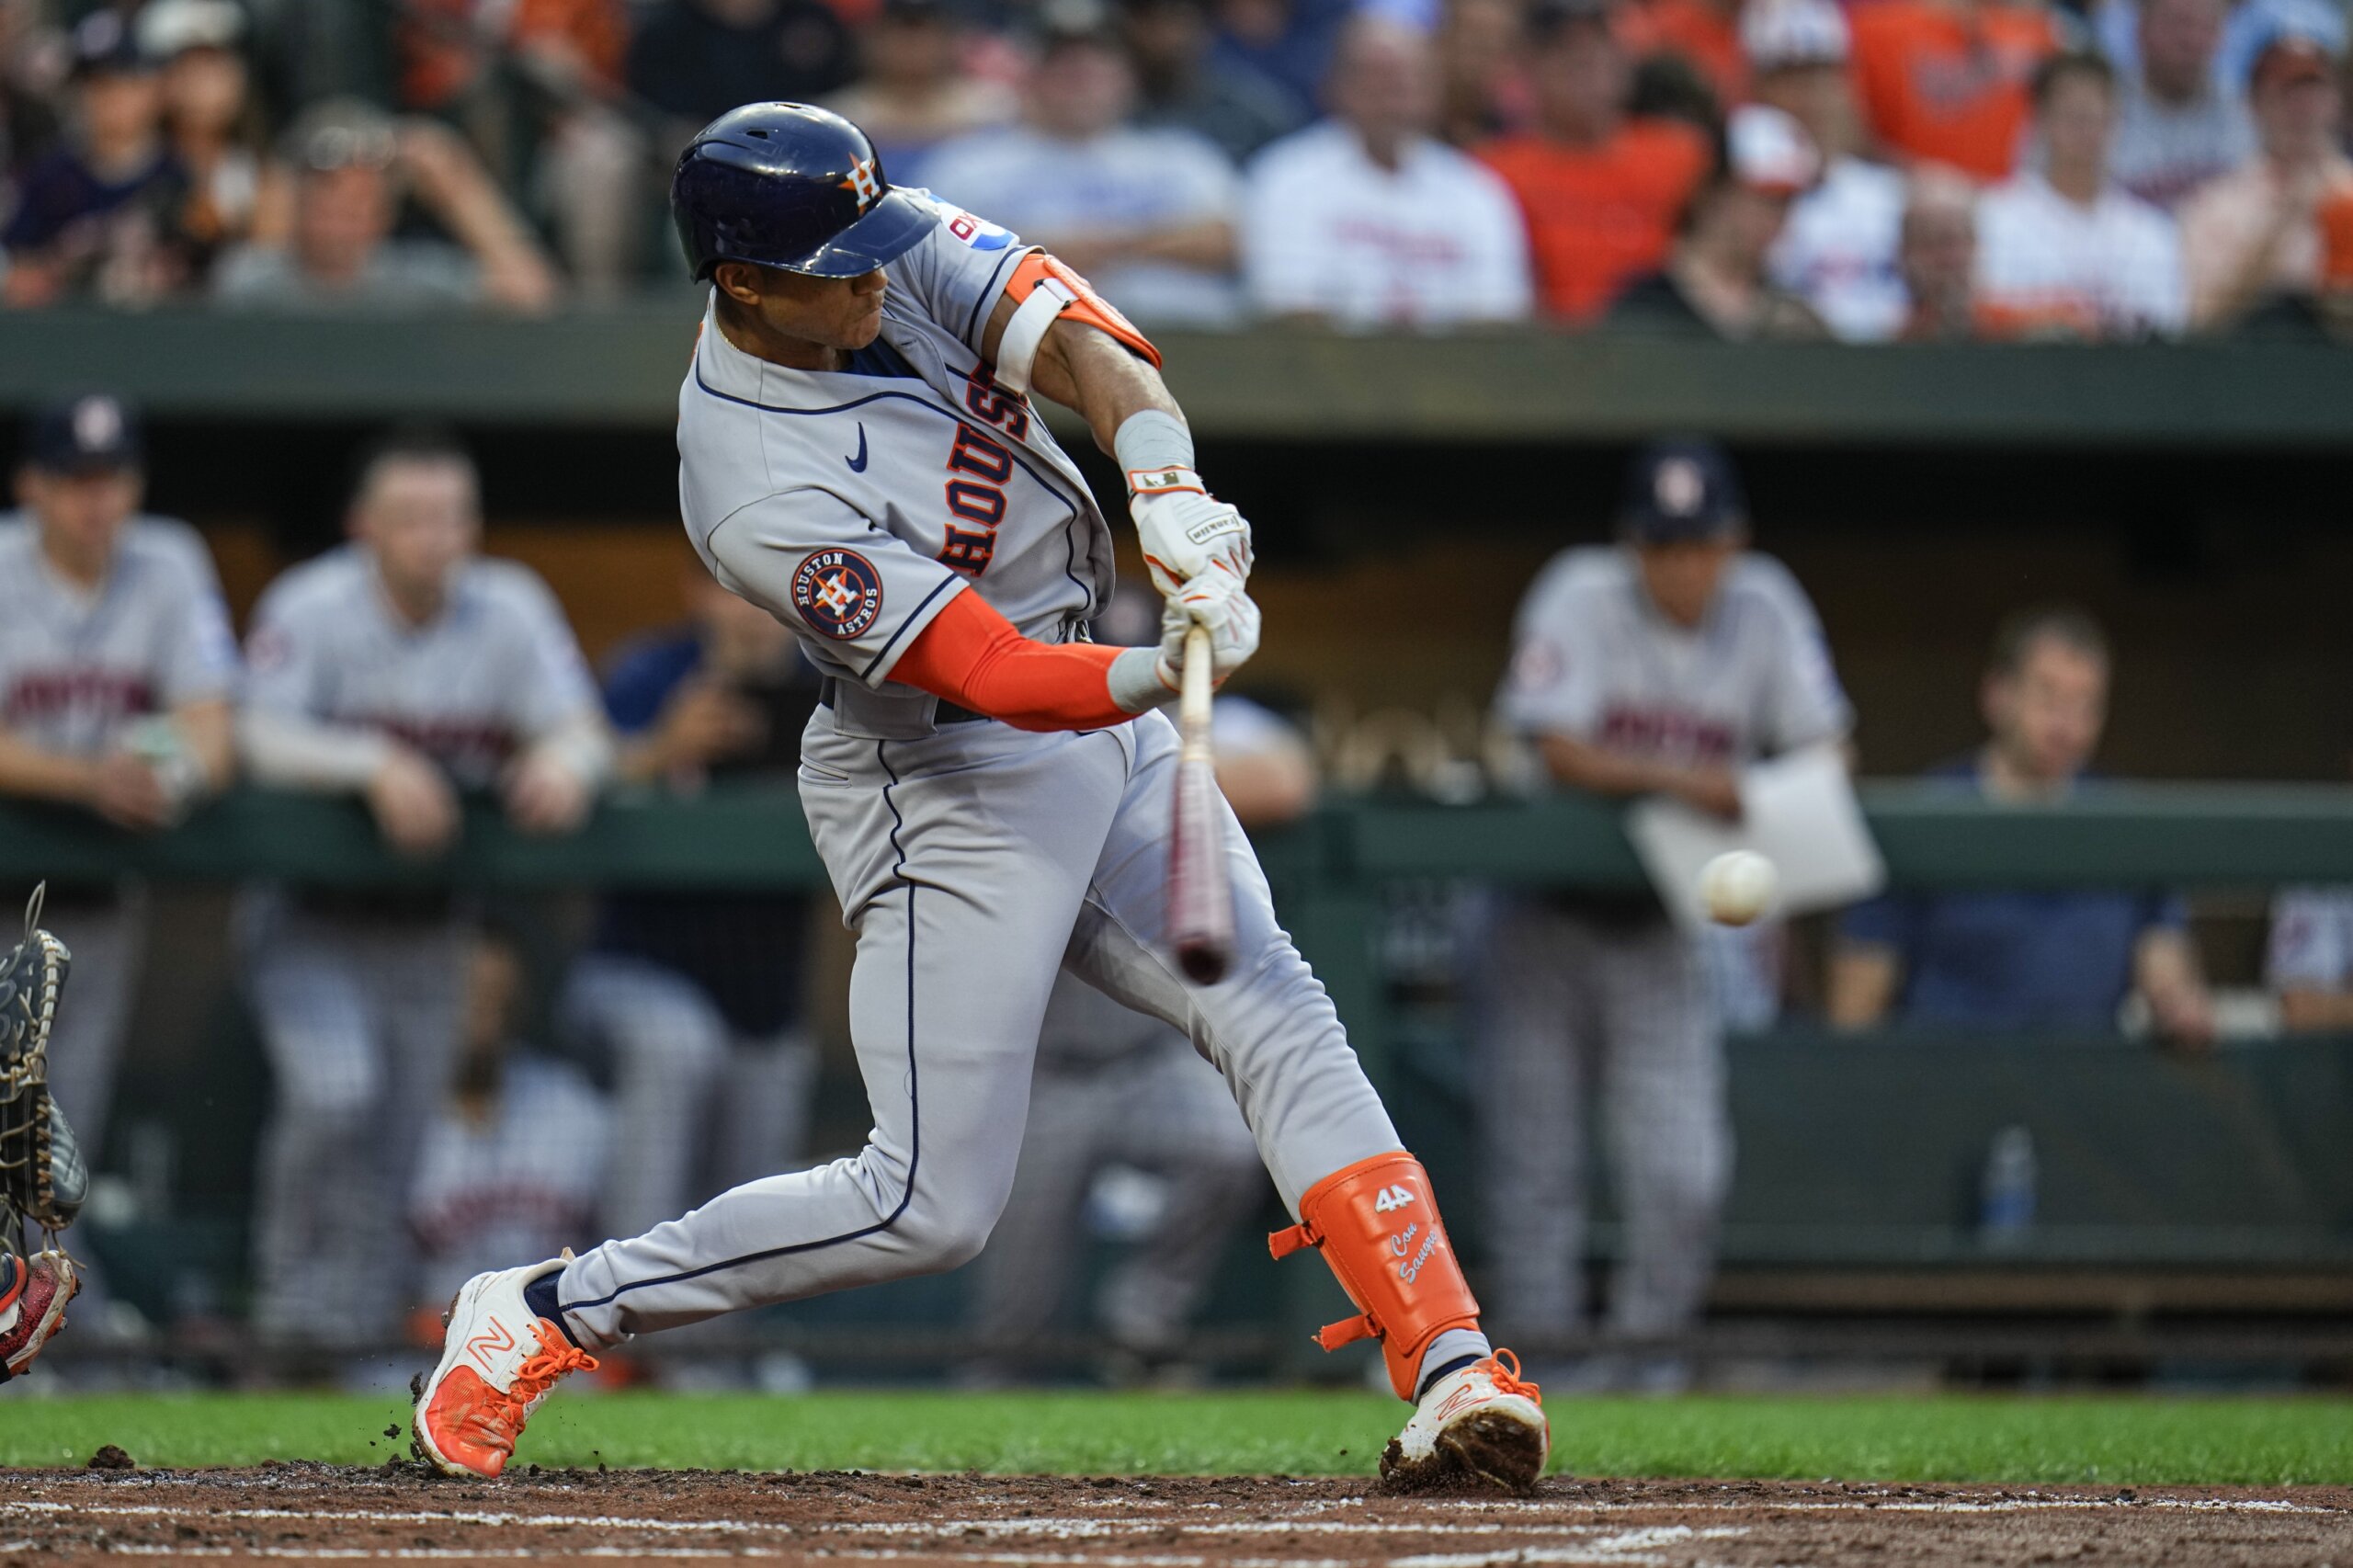 Kyle Tuckers 9th-inning grand slam off Félix Bautista lifts Astros to 7-6 victory over Orioles pic